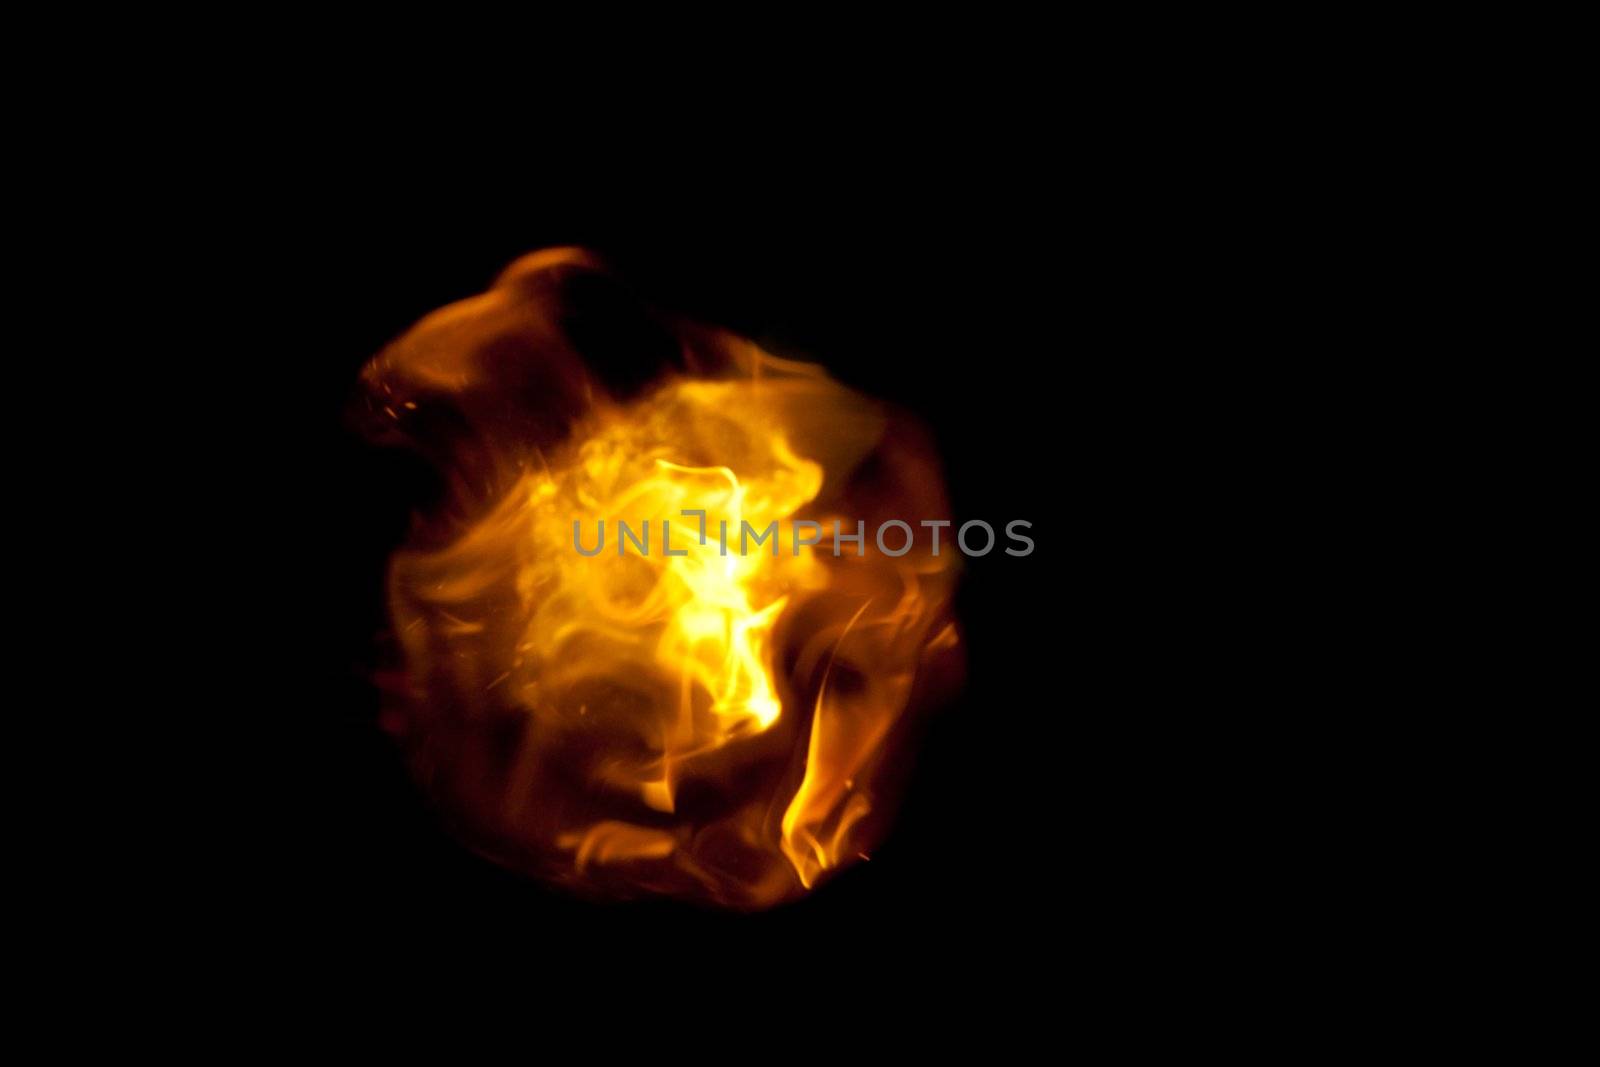 Ball of fire against a black background